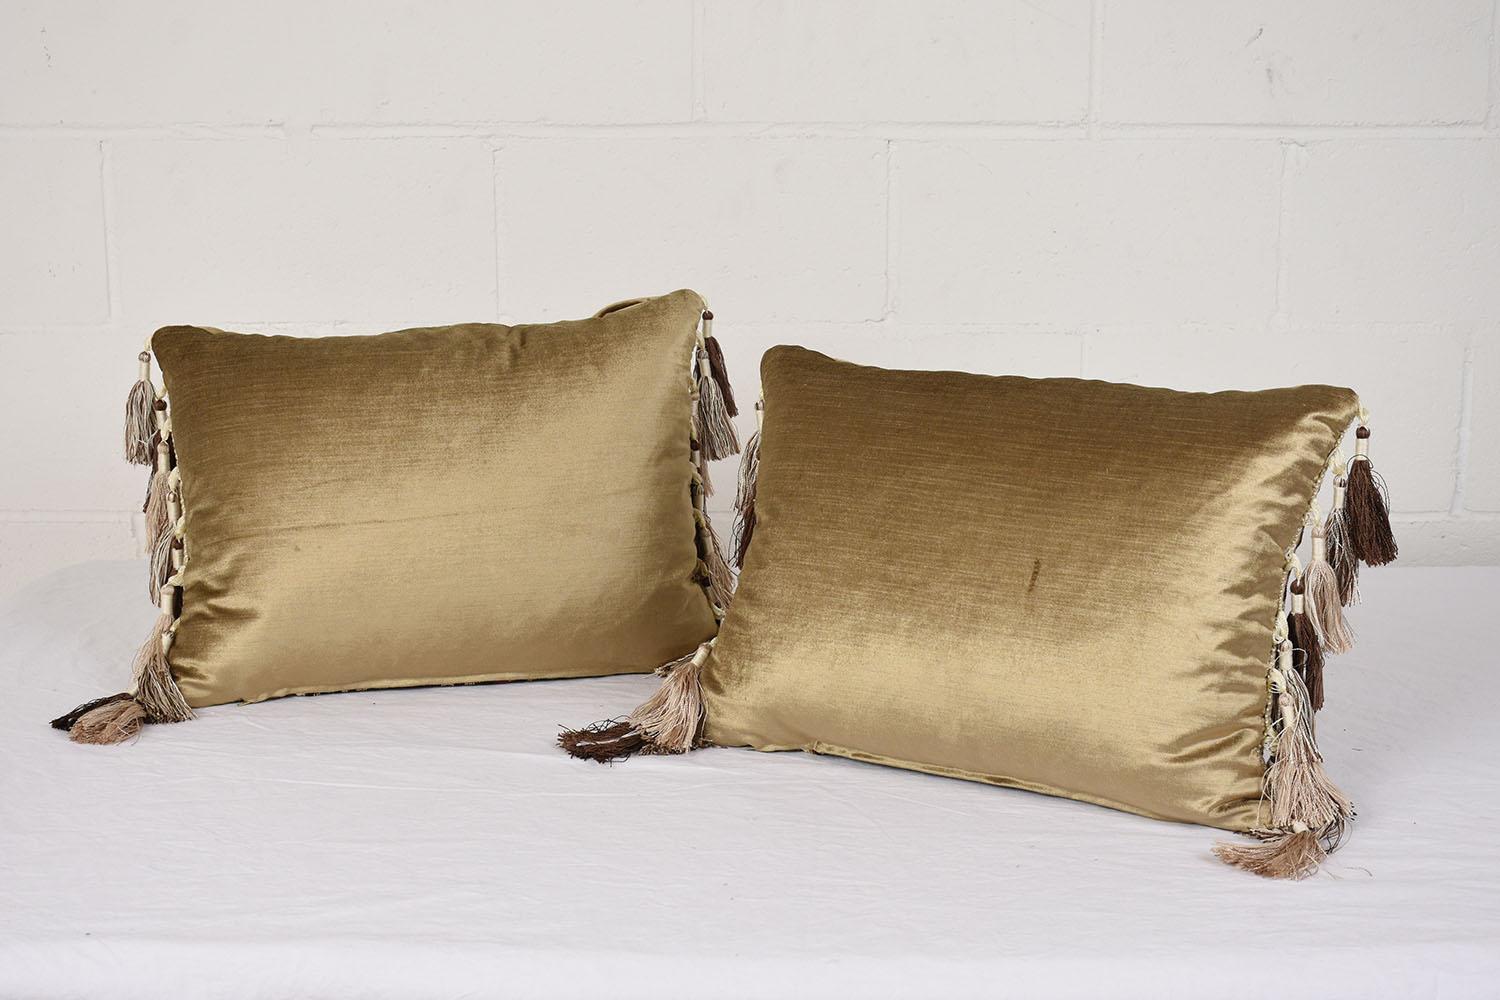 Embroidered 19th-Century French Antique Floral Tapestry Pillows with Gold Velvet and Tassels For Sale